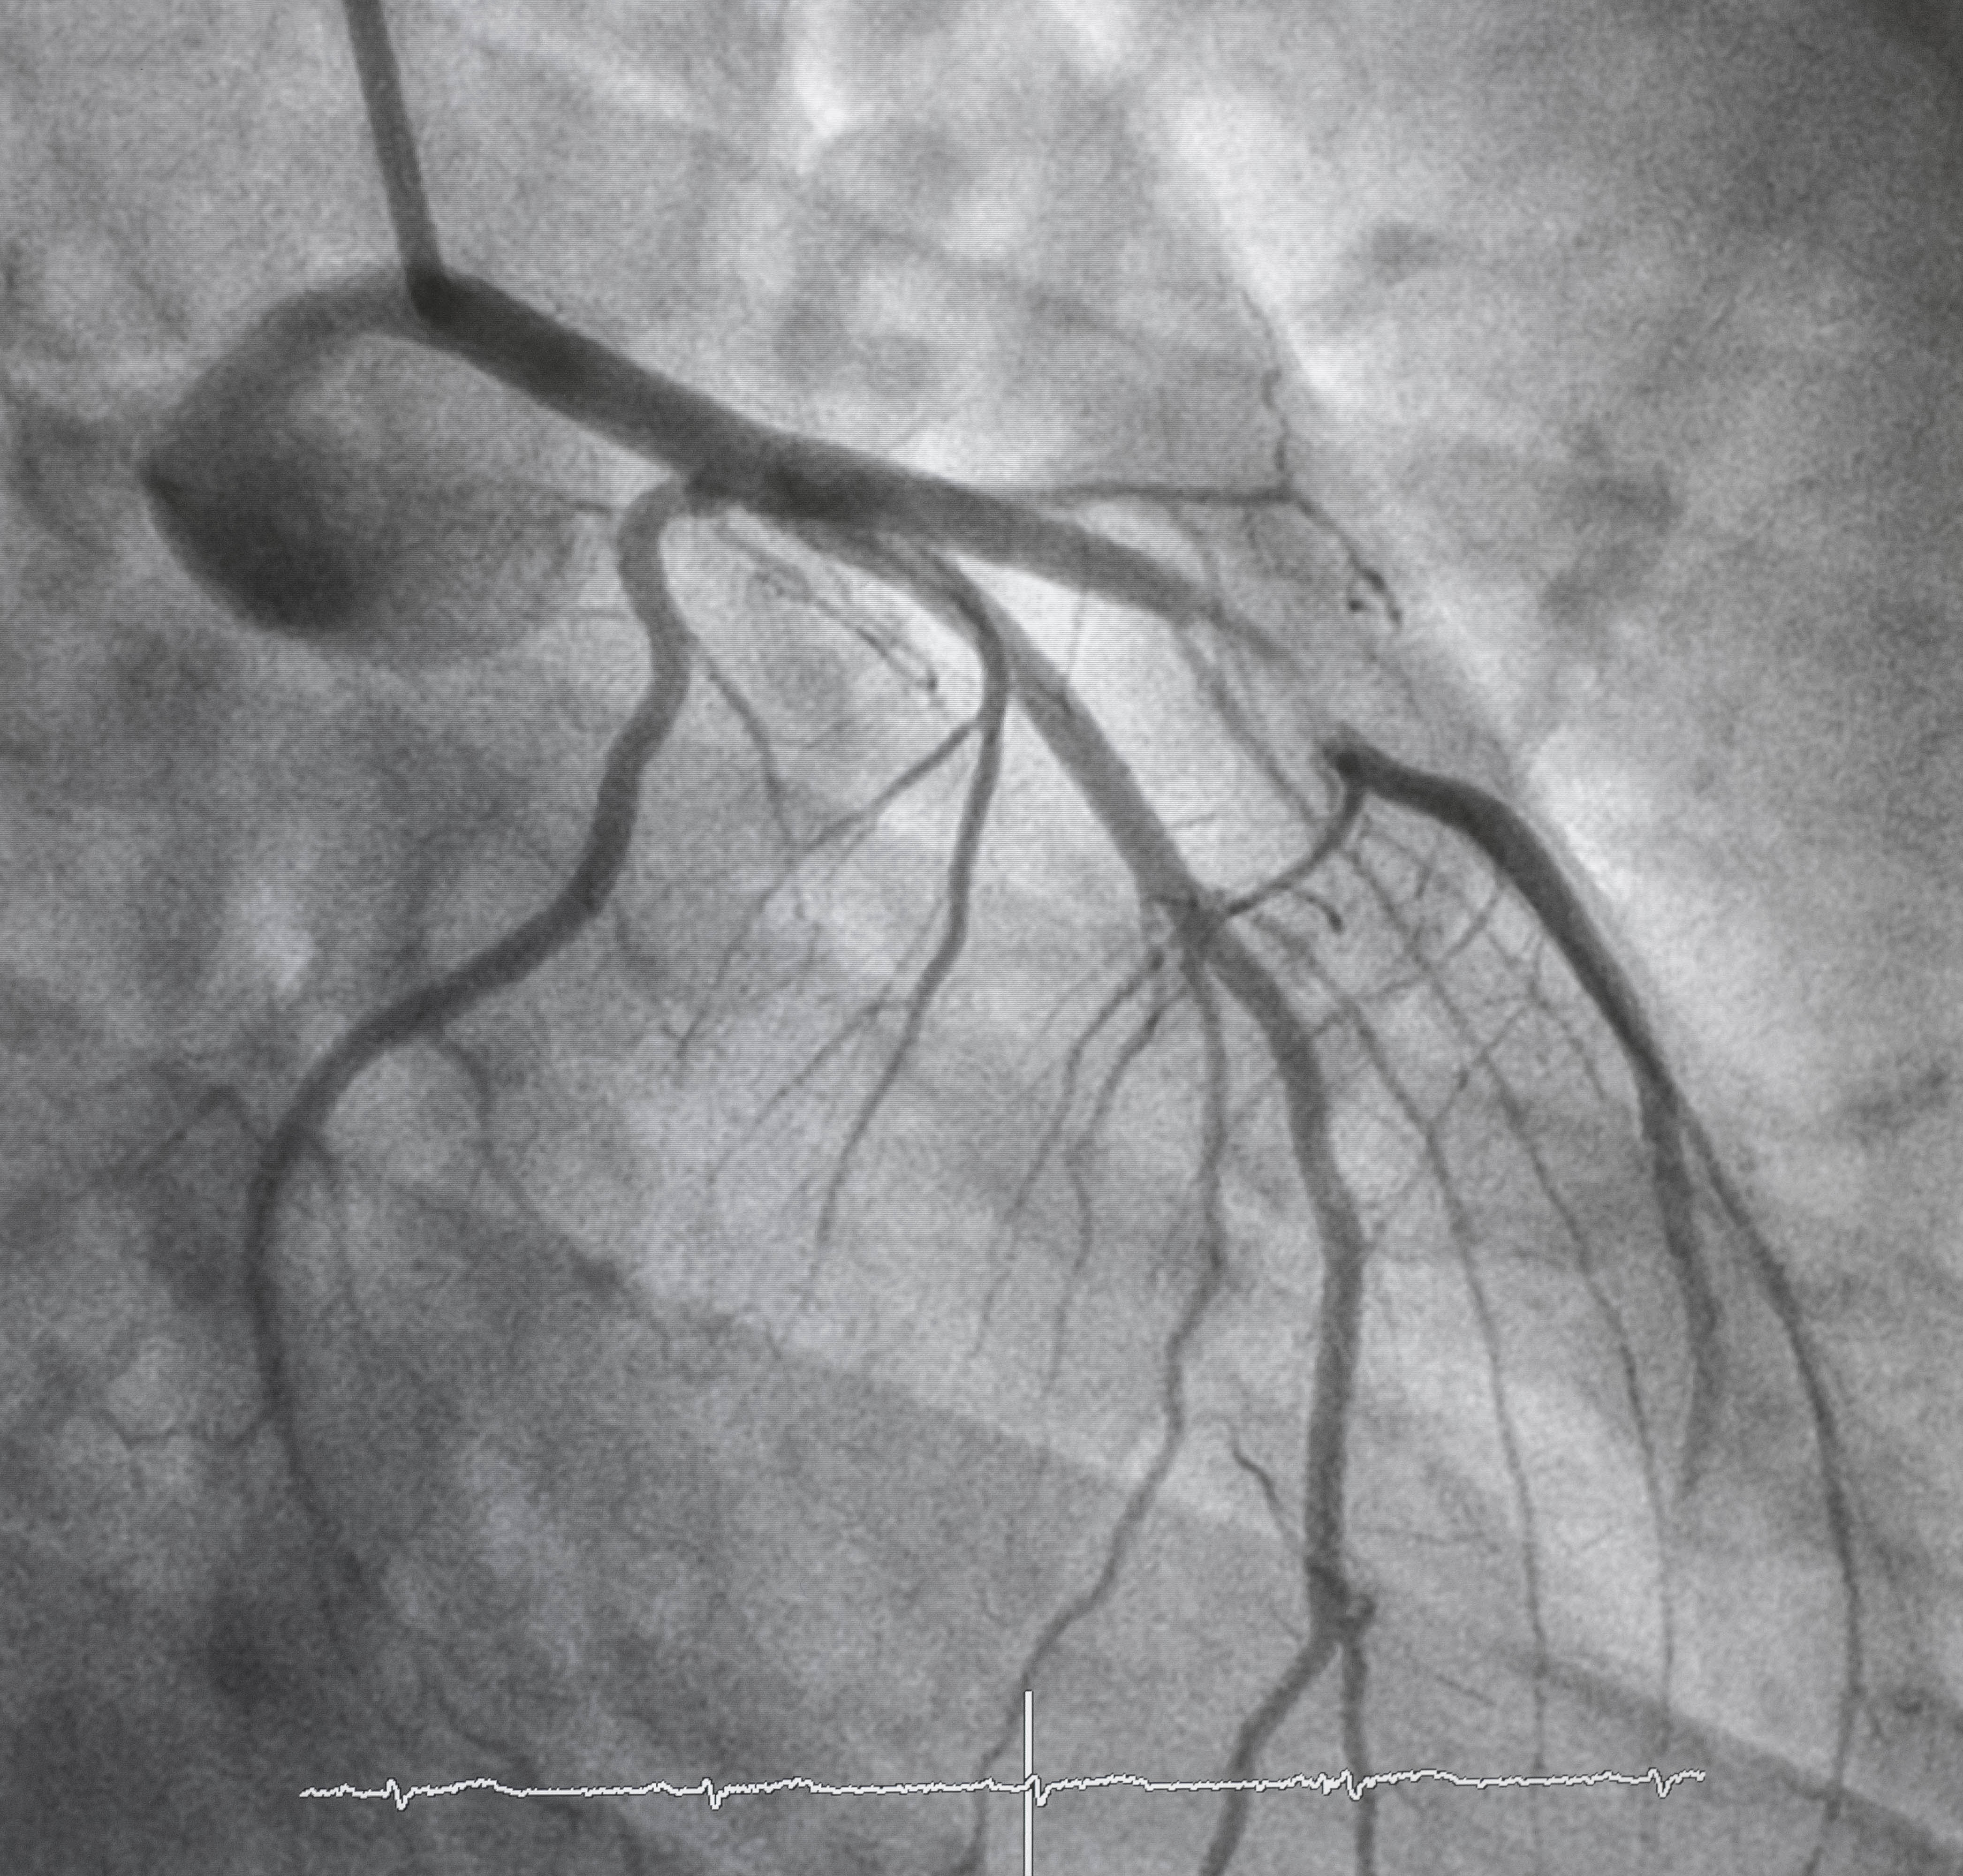 A black and white image of an angiogram.